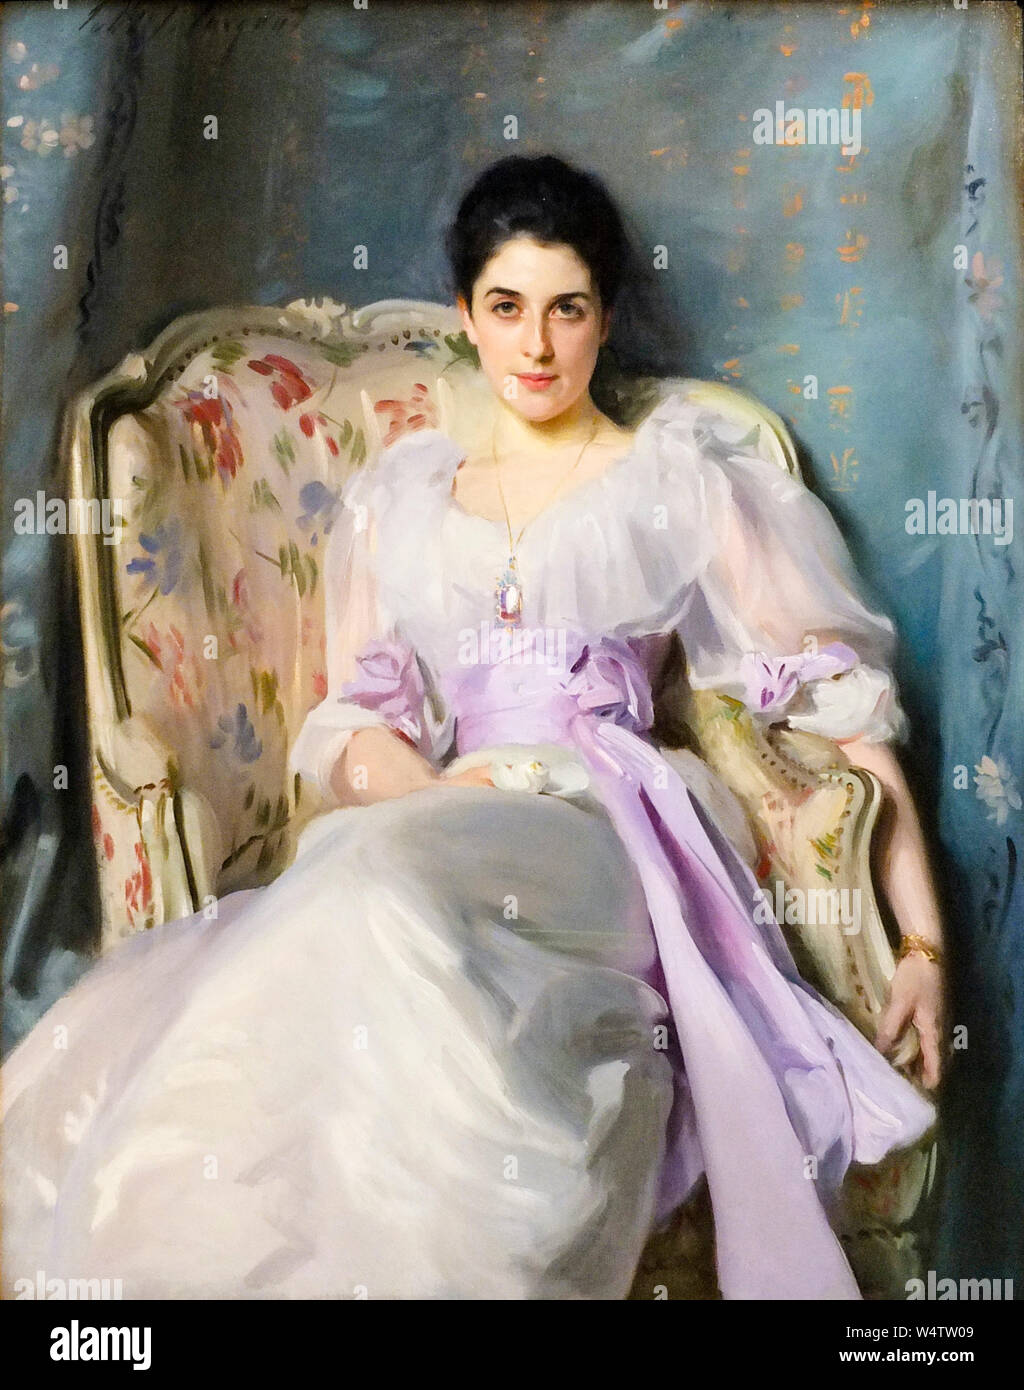 John Singer Sargent, Lady Agnew of Lochnaw, (1865-1932), portrait painting, 1892 Stock Photo